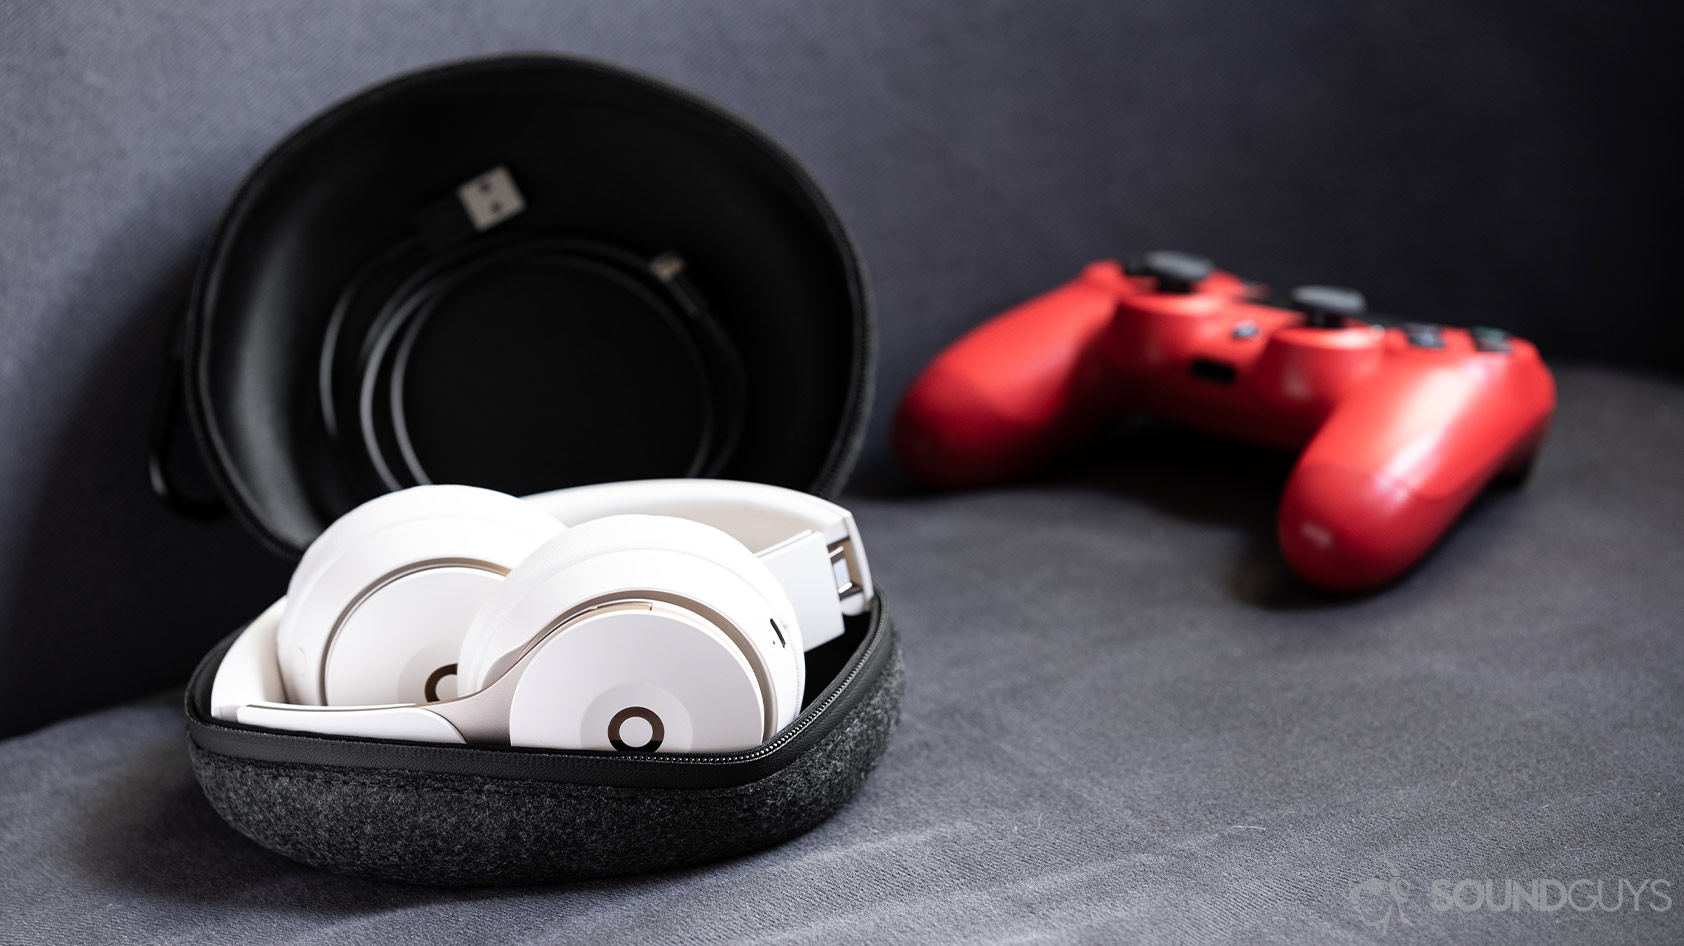 A photo of the Beats Solo Pro on-ear noise canceling headphones folded in the cloth carrying pouch with the included Lightning cable and a PS4 controller (red) in the background.